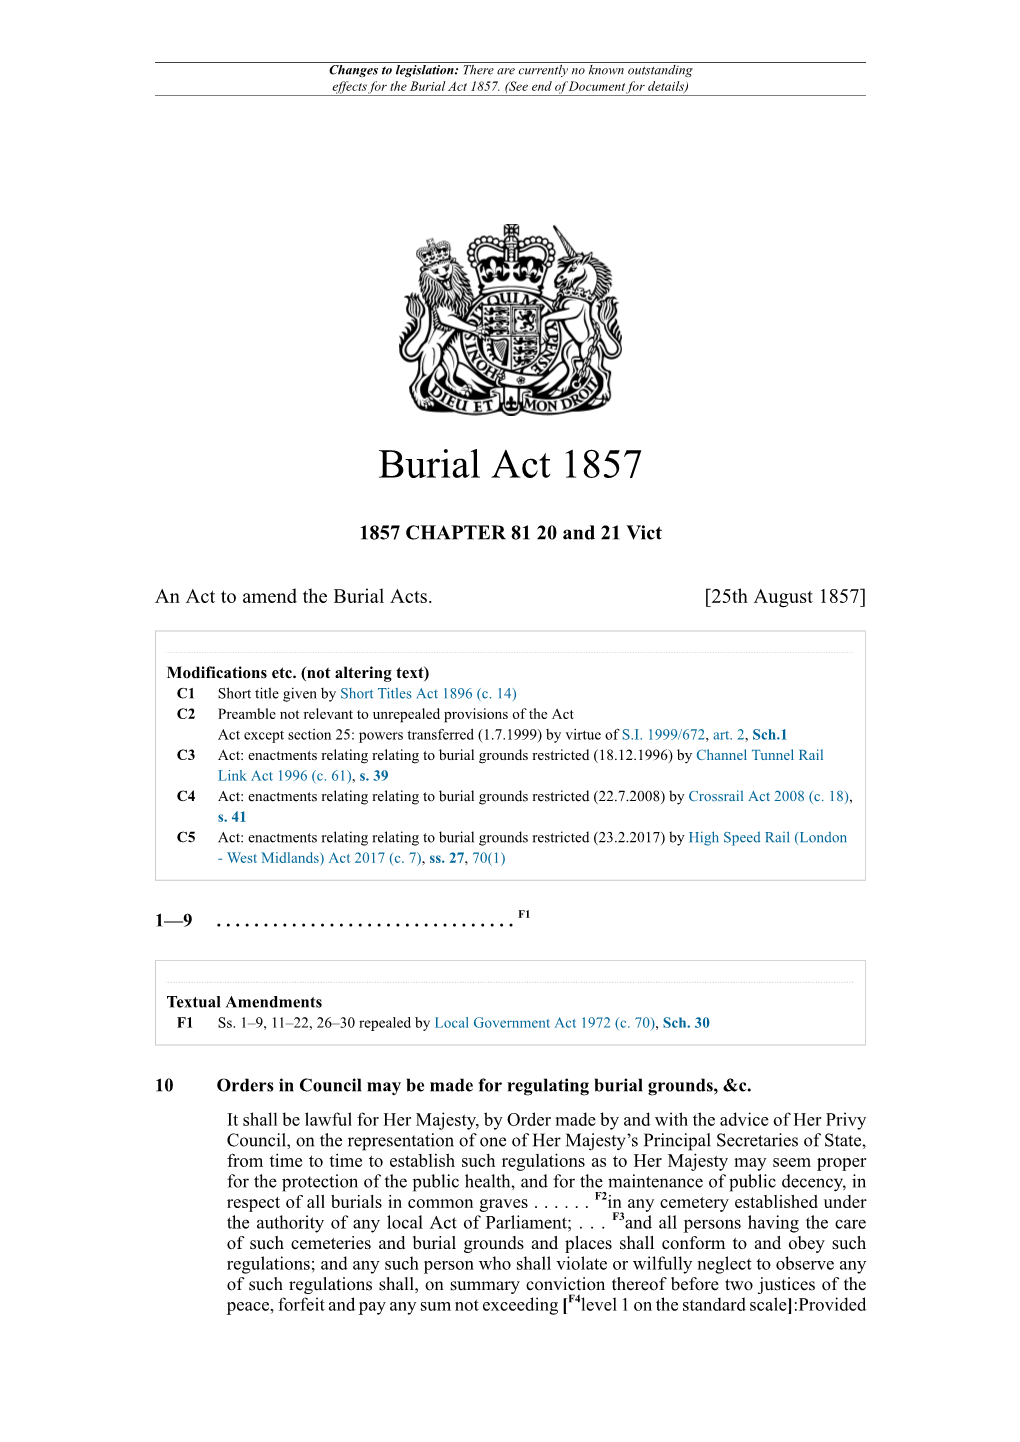 Burial Act 1857